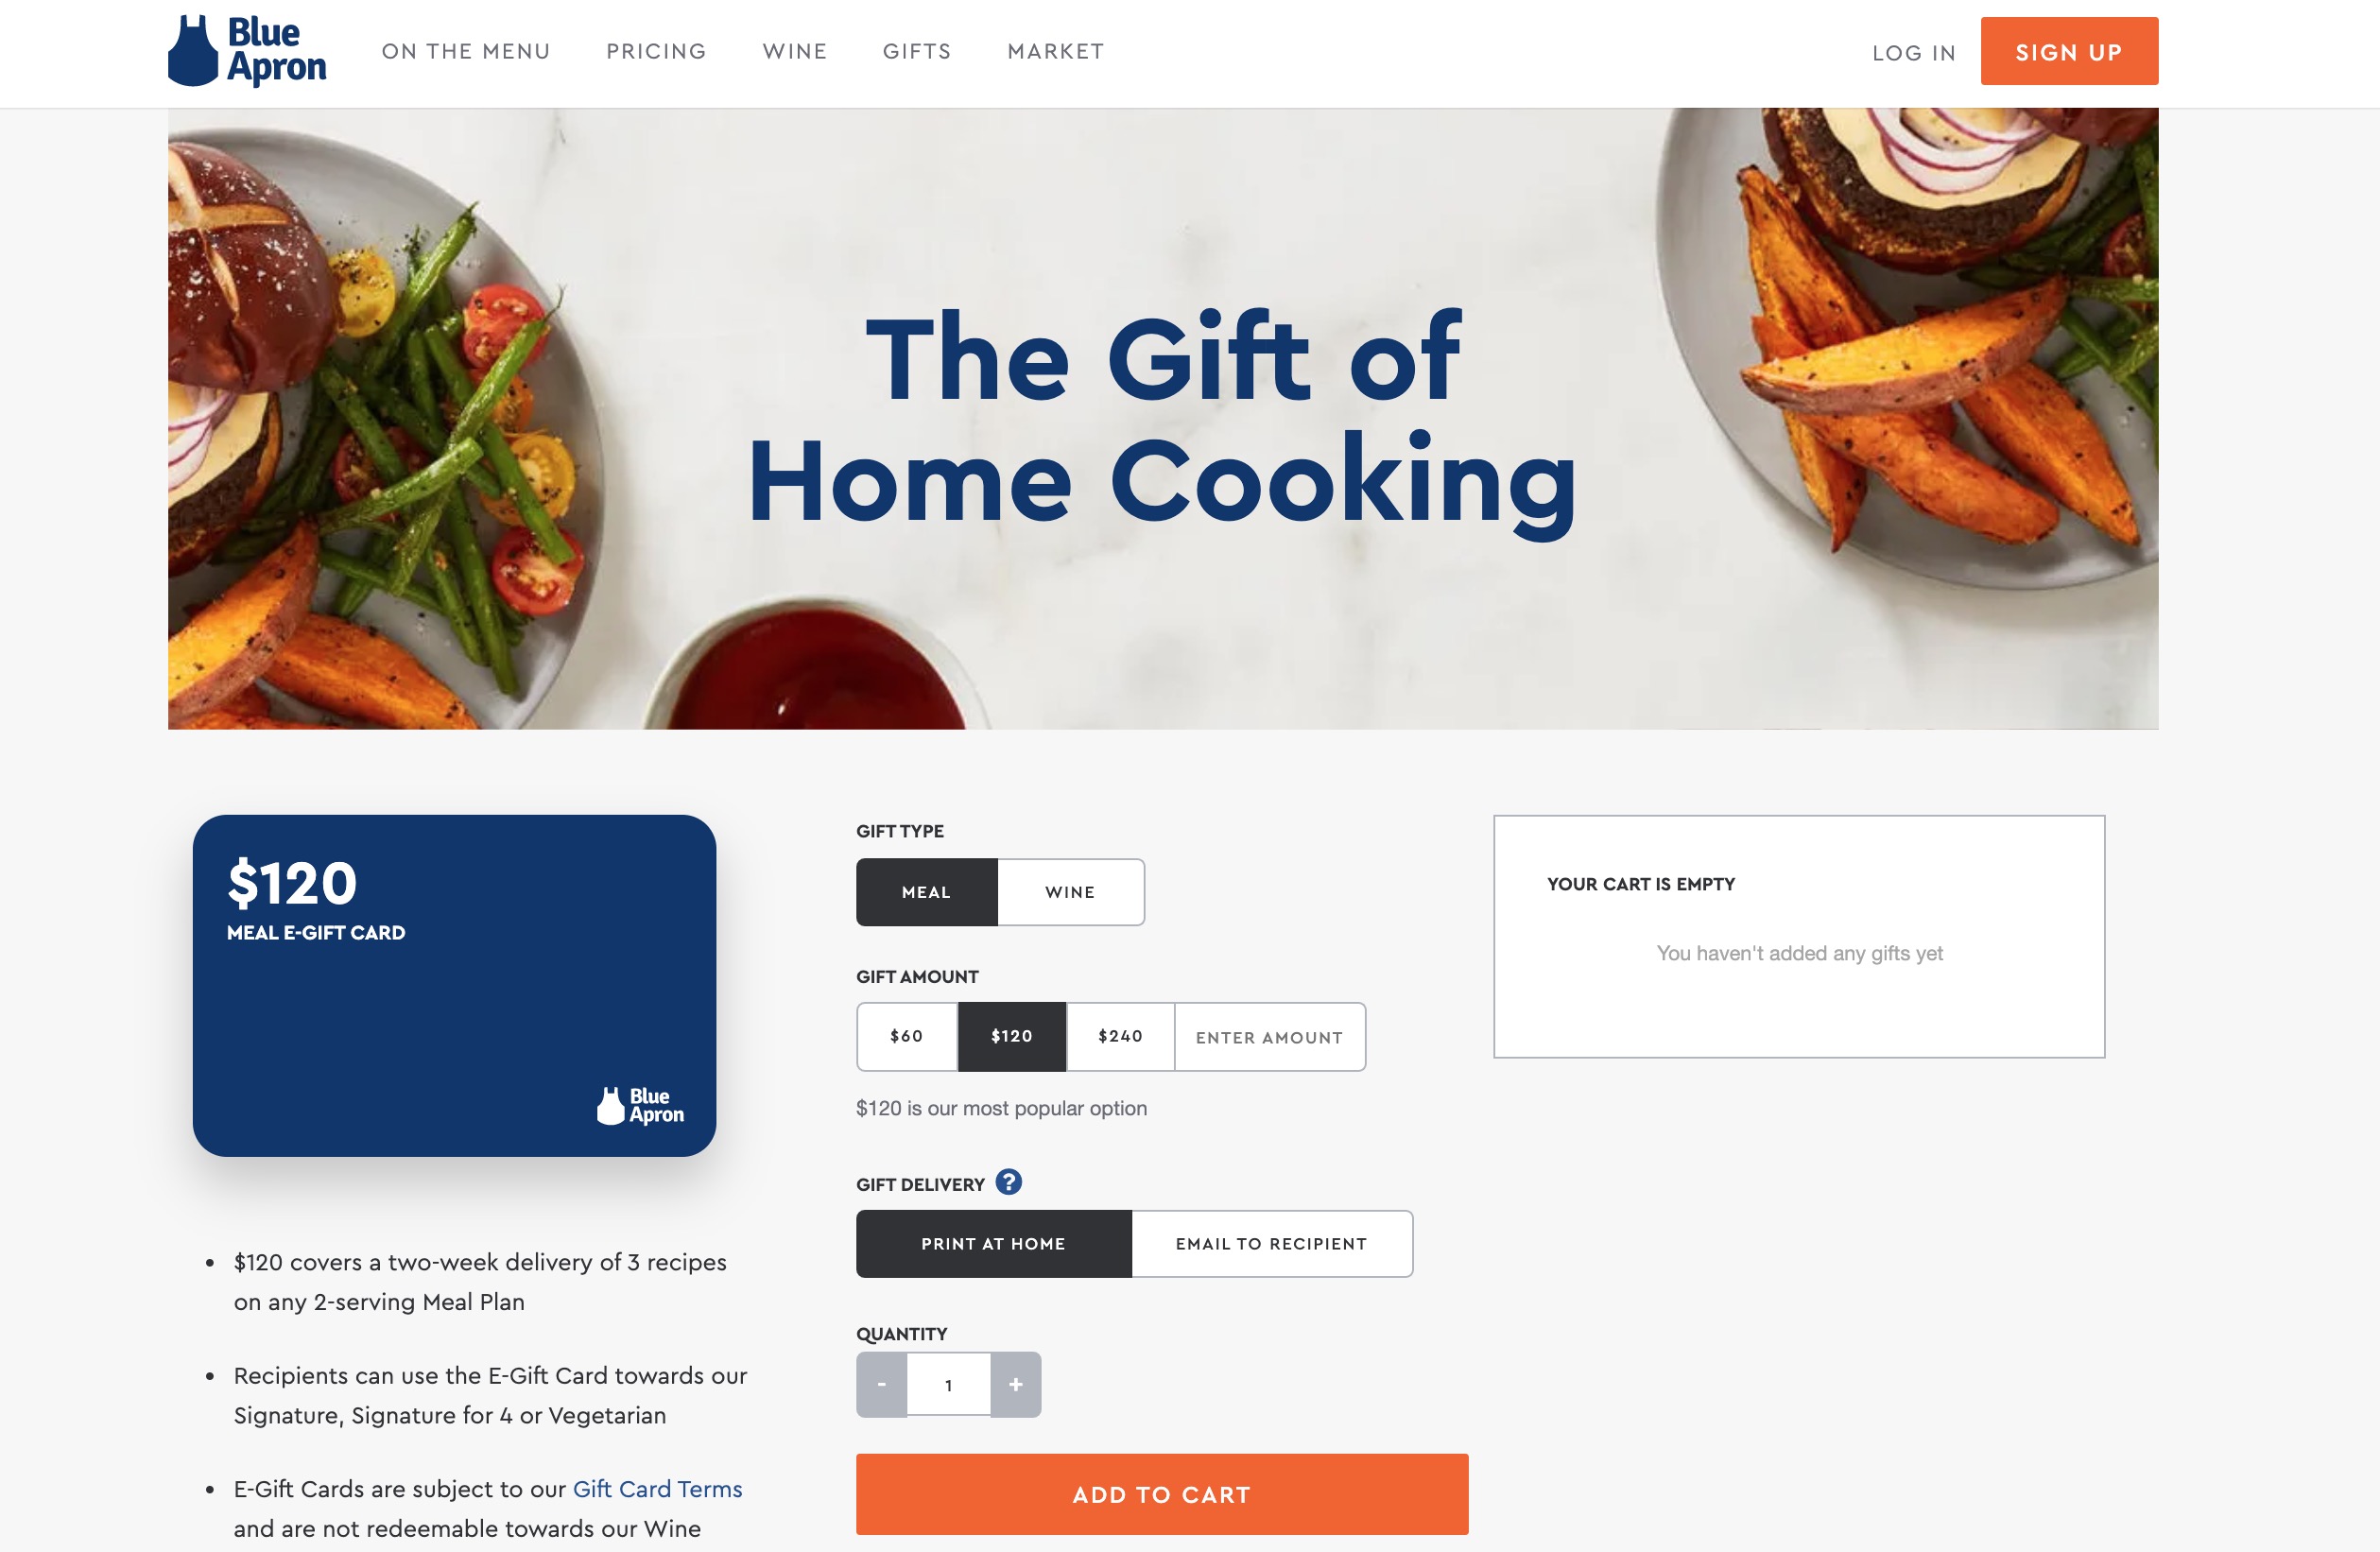 Blue Apron gift cards